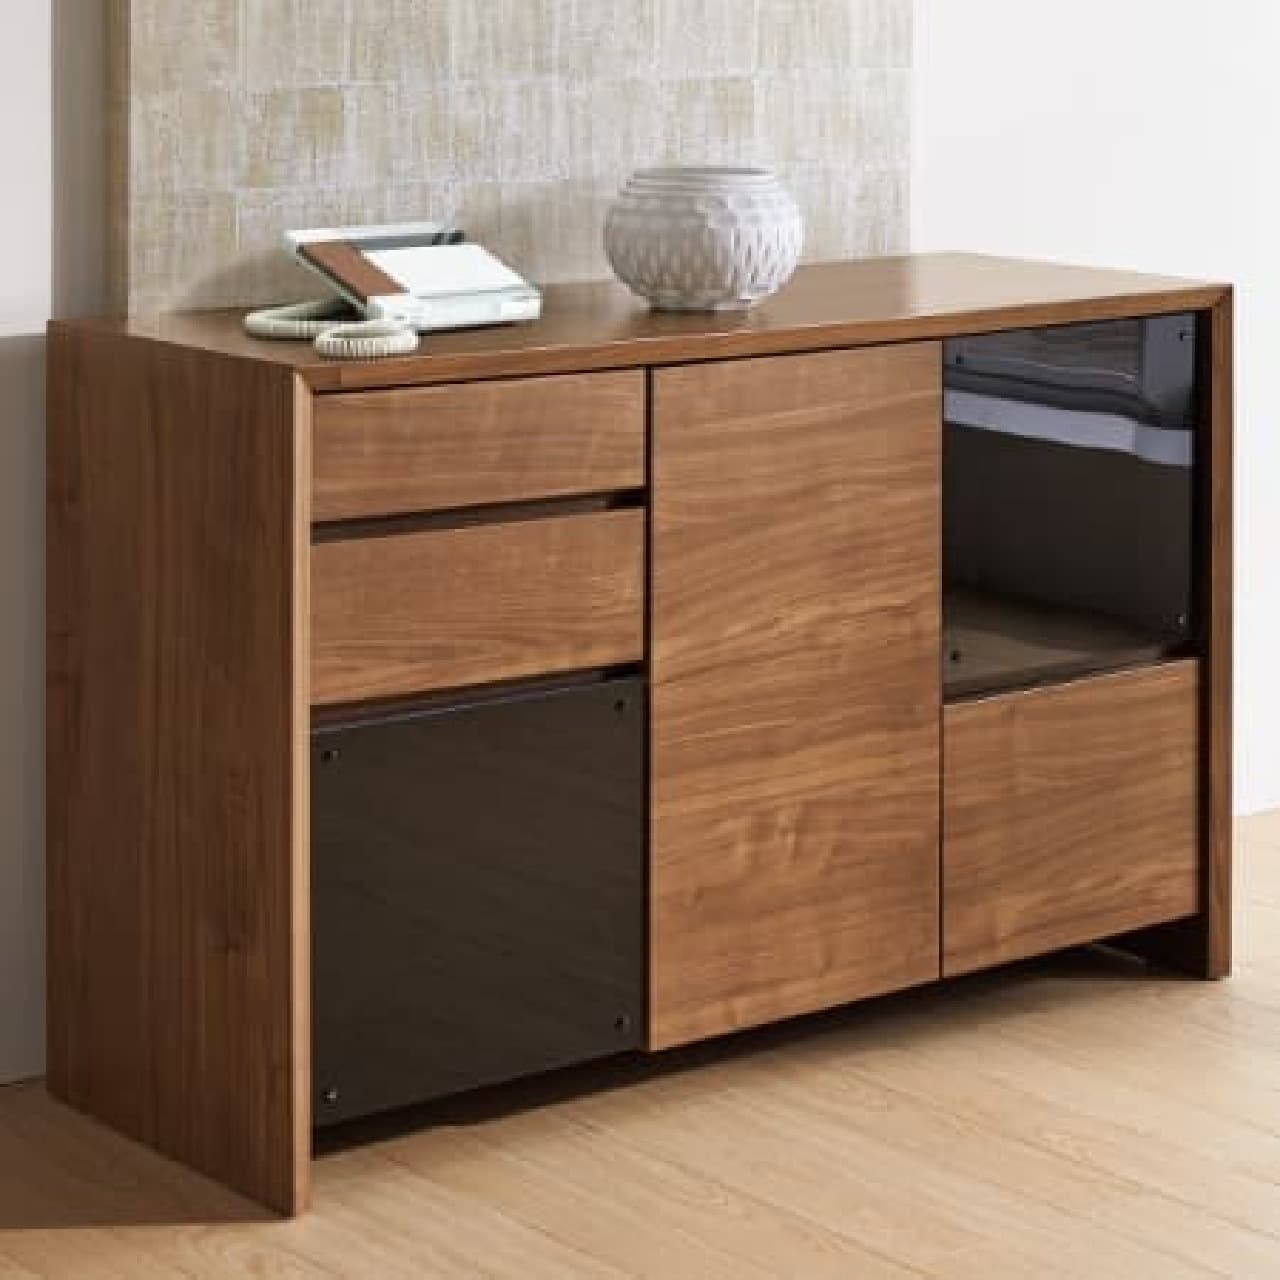 Cabinet that has both luxury and storage capacity